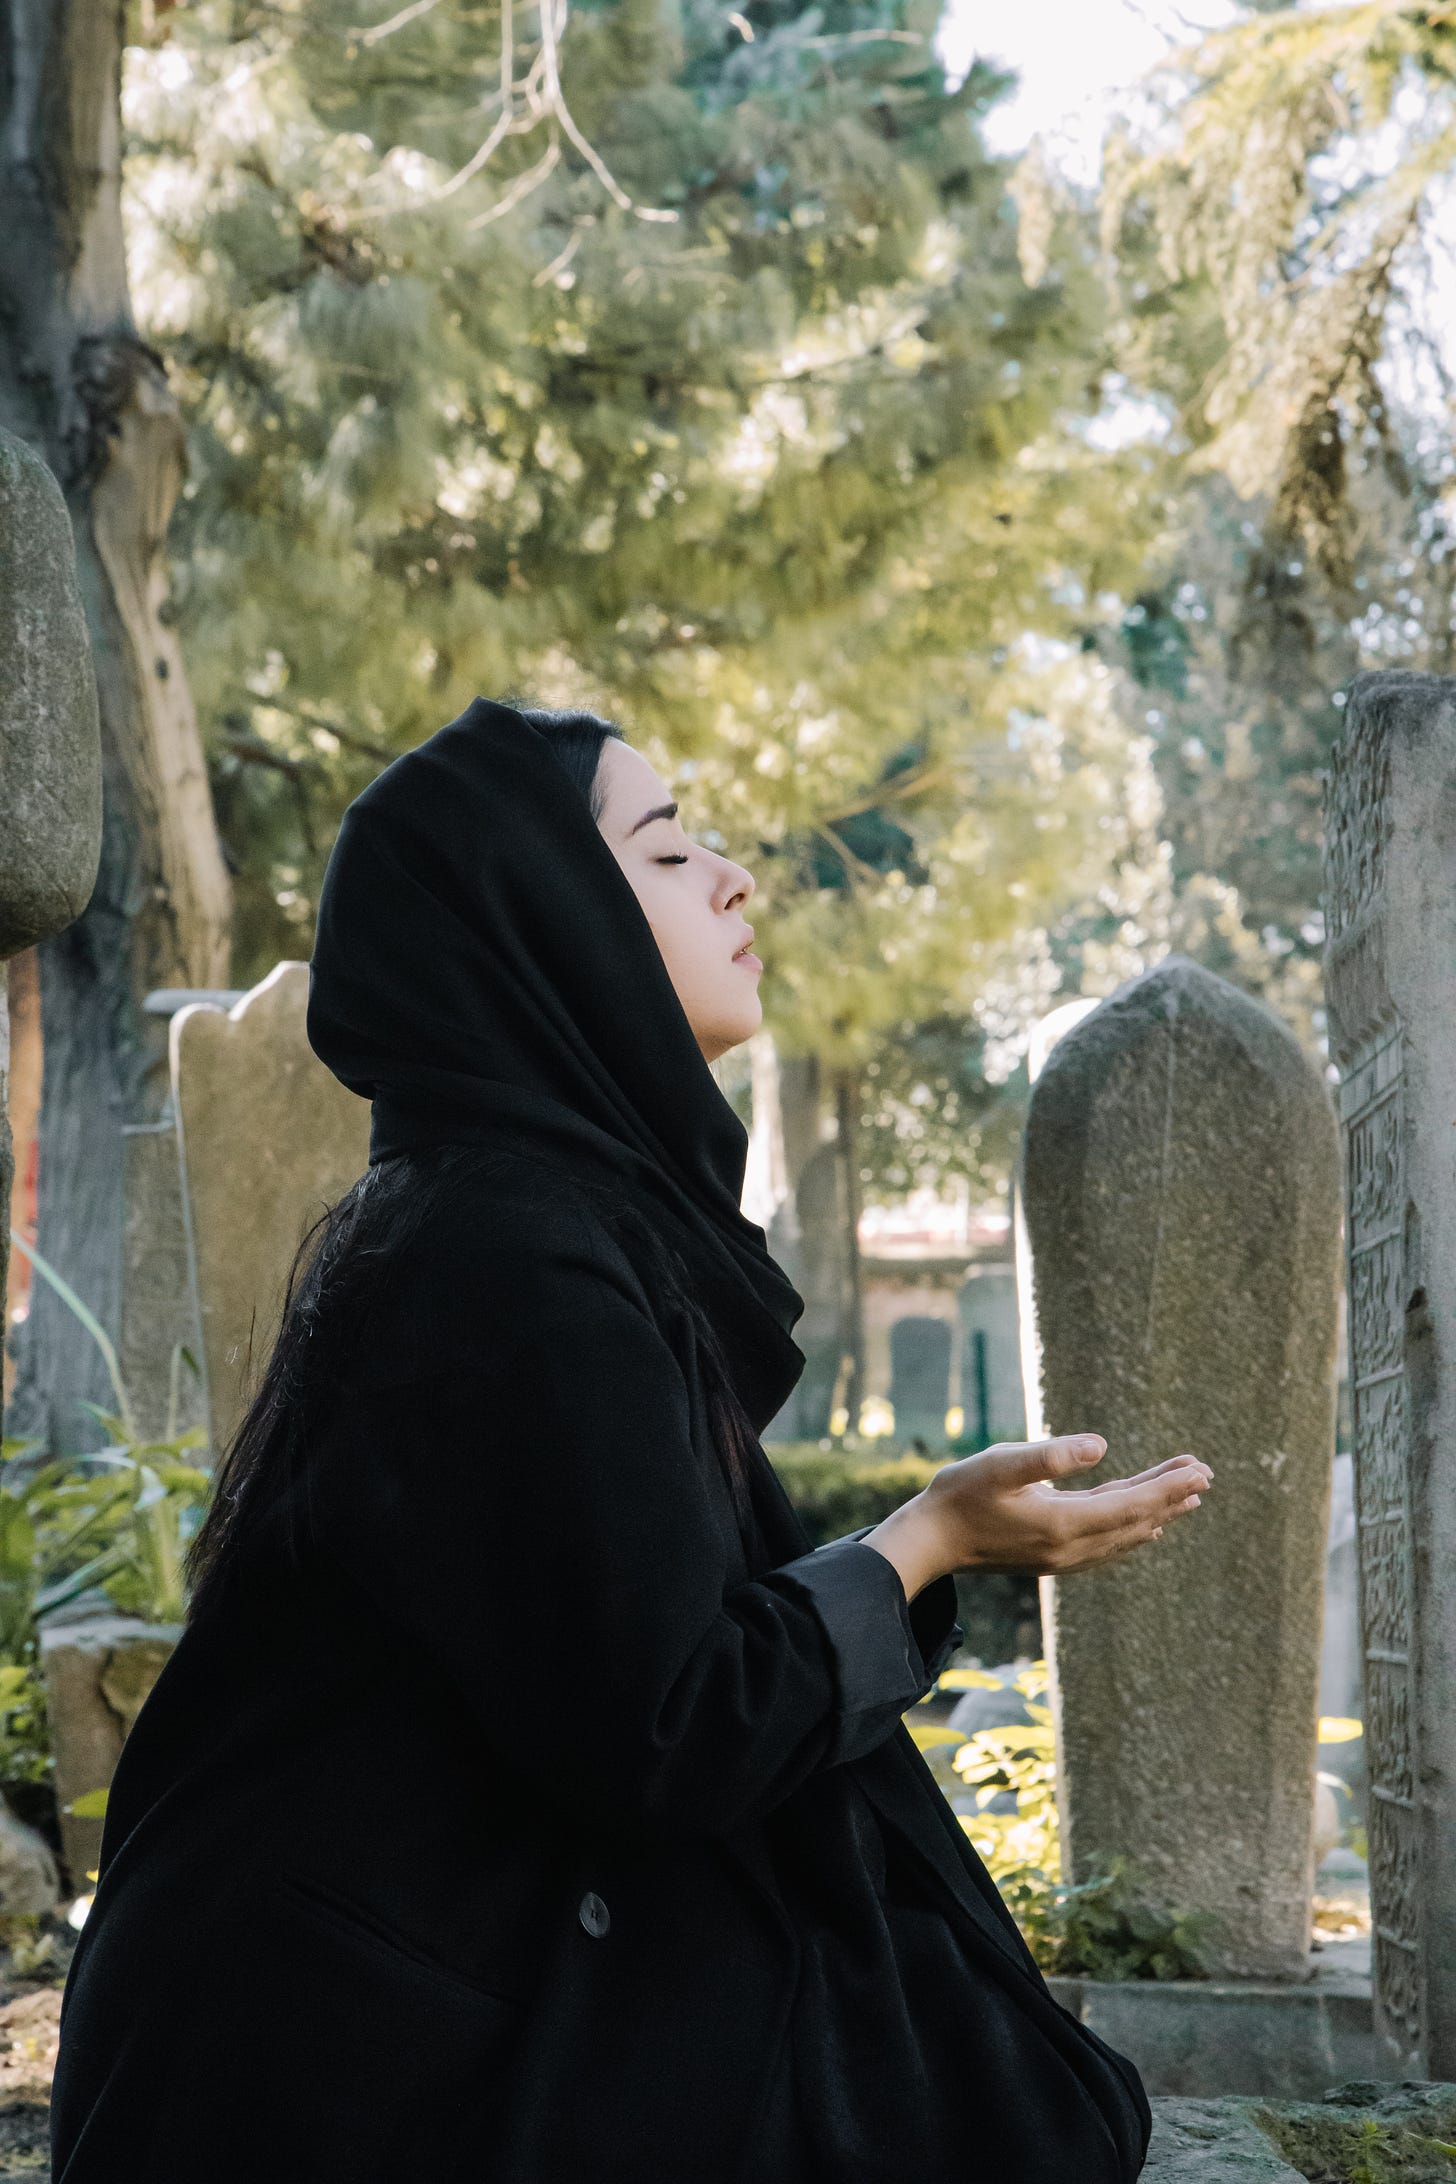 Muslim woman in black praying at a cemetary